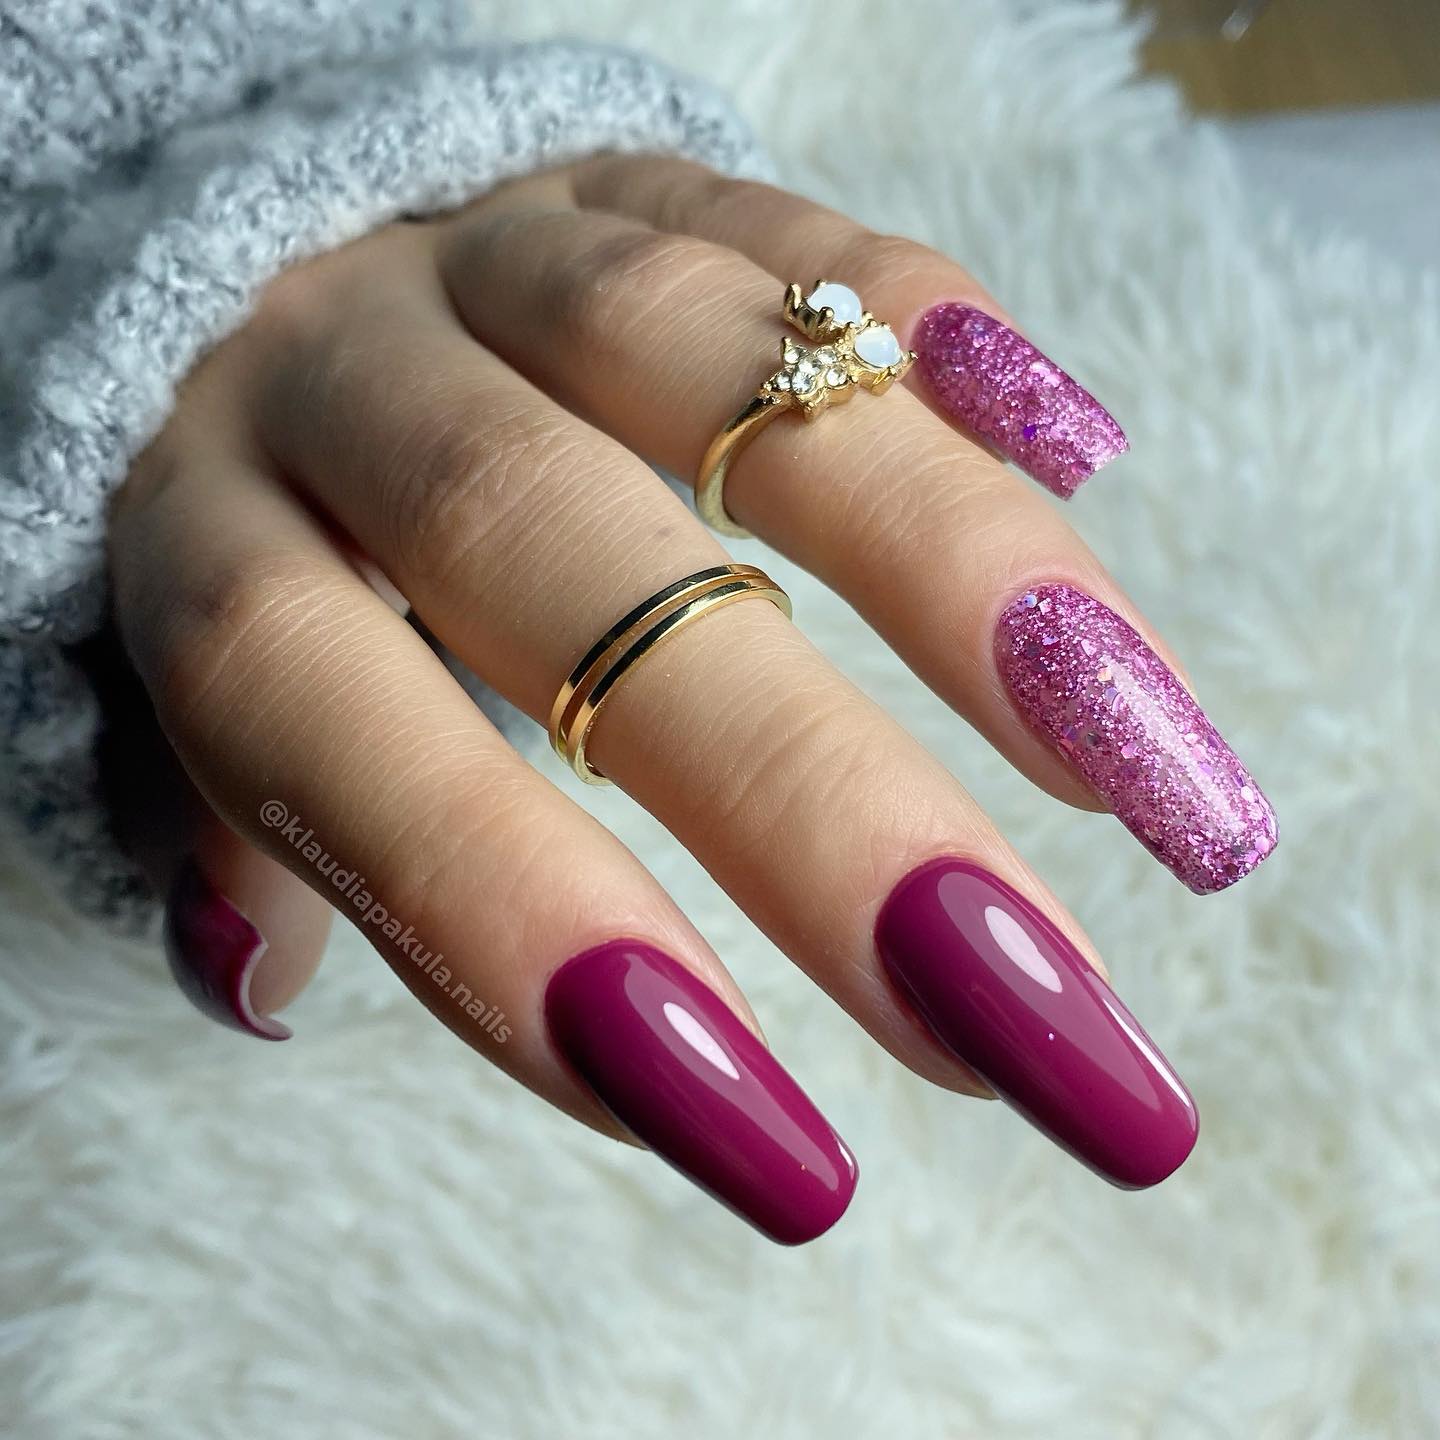 Long Light Burgundy Nails with Pink Glitter